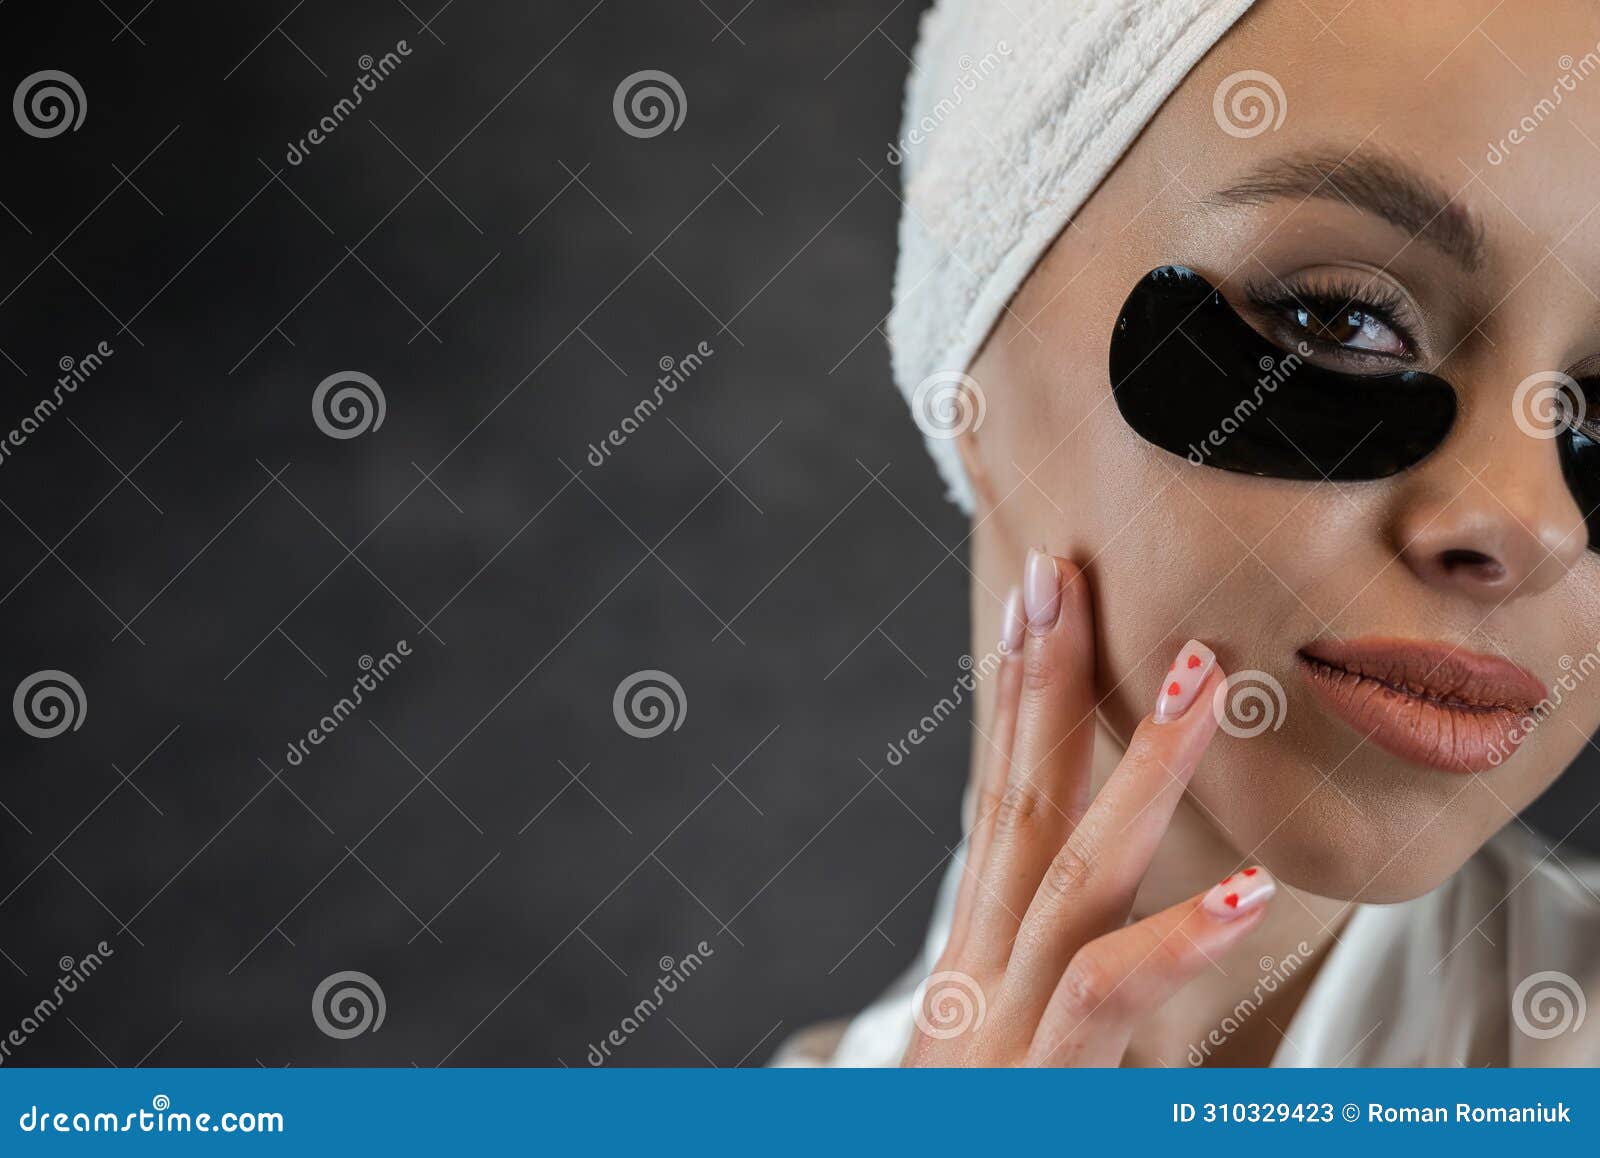 satisfied woman in white towel applying eye patches for puffiness, wrinkles